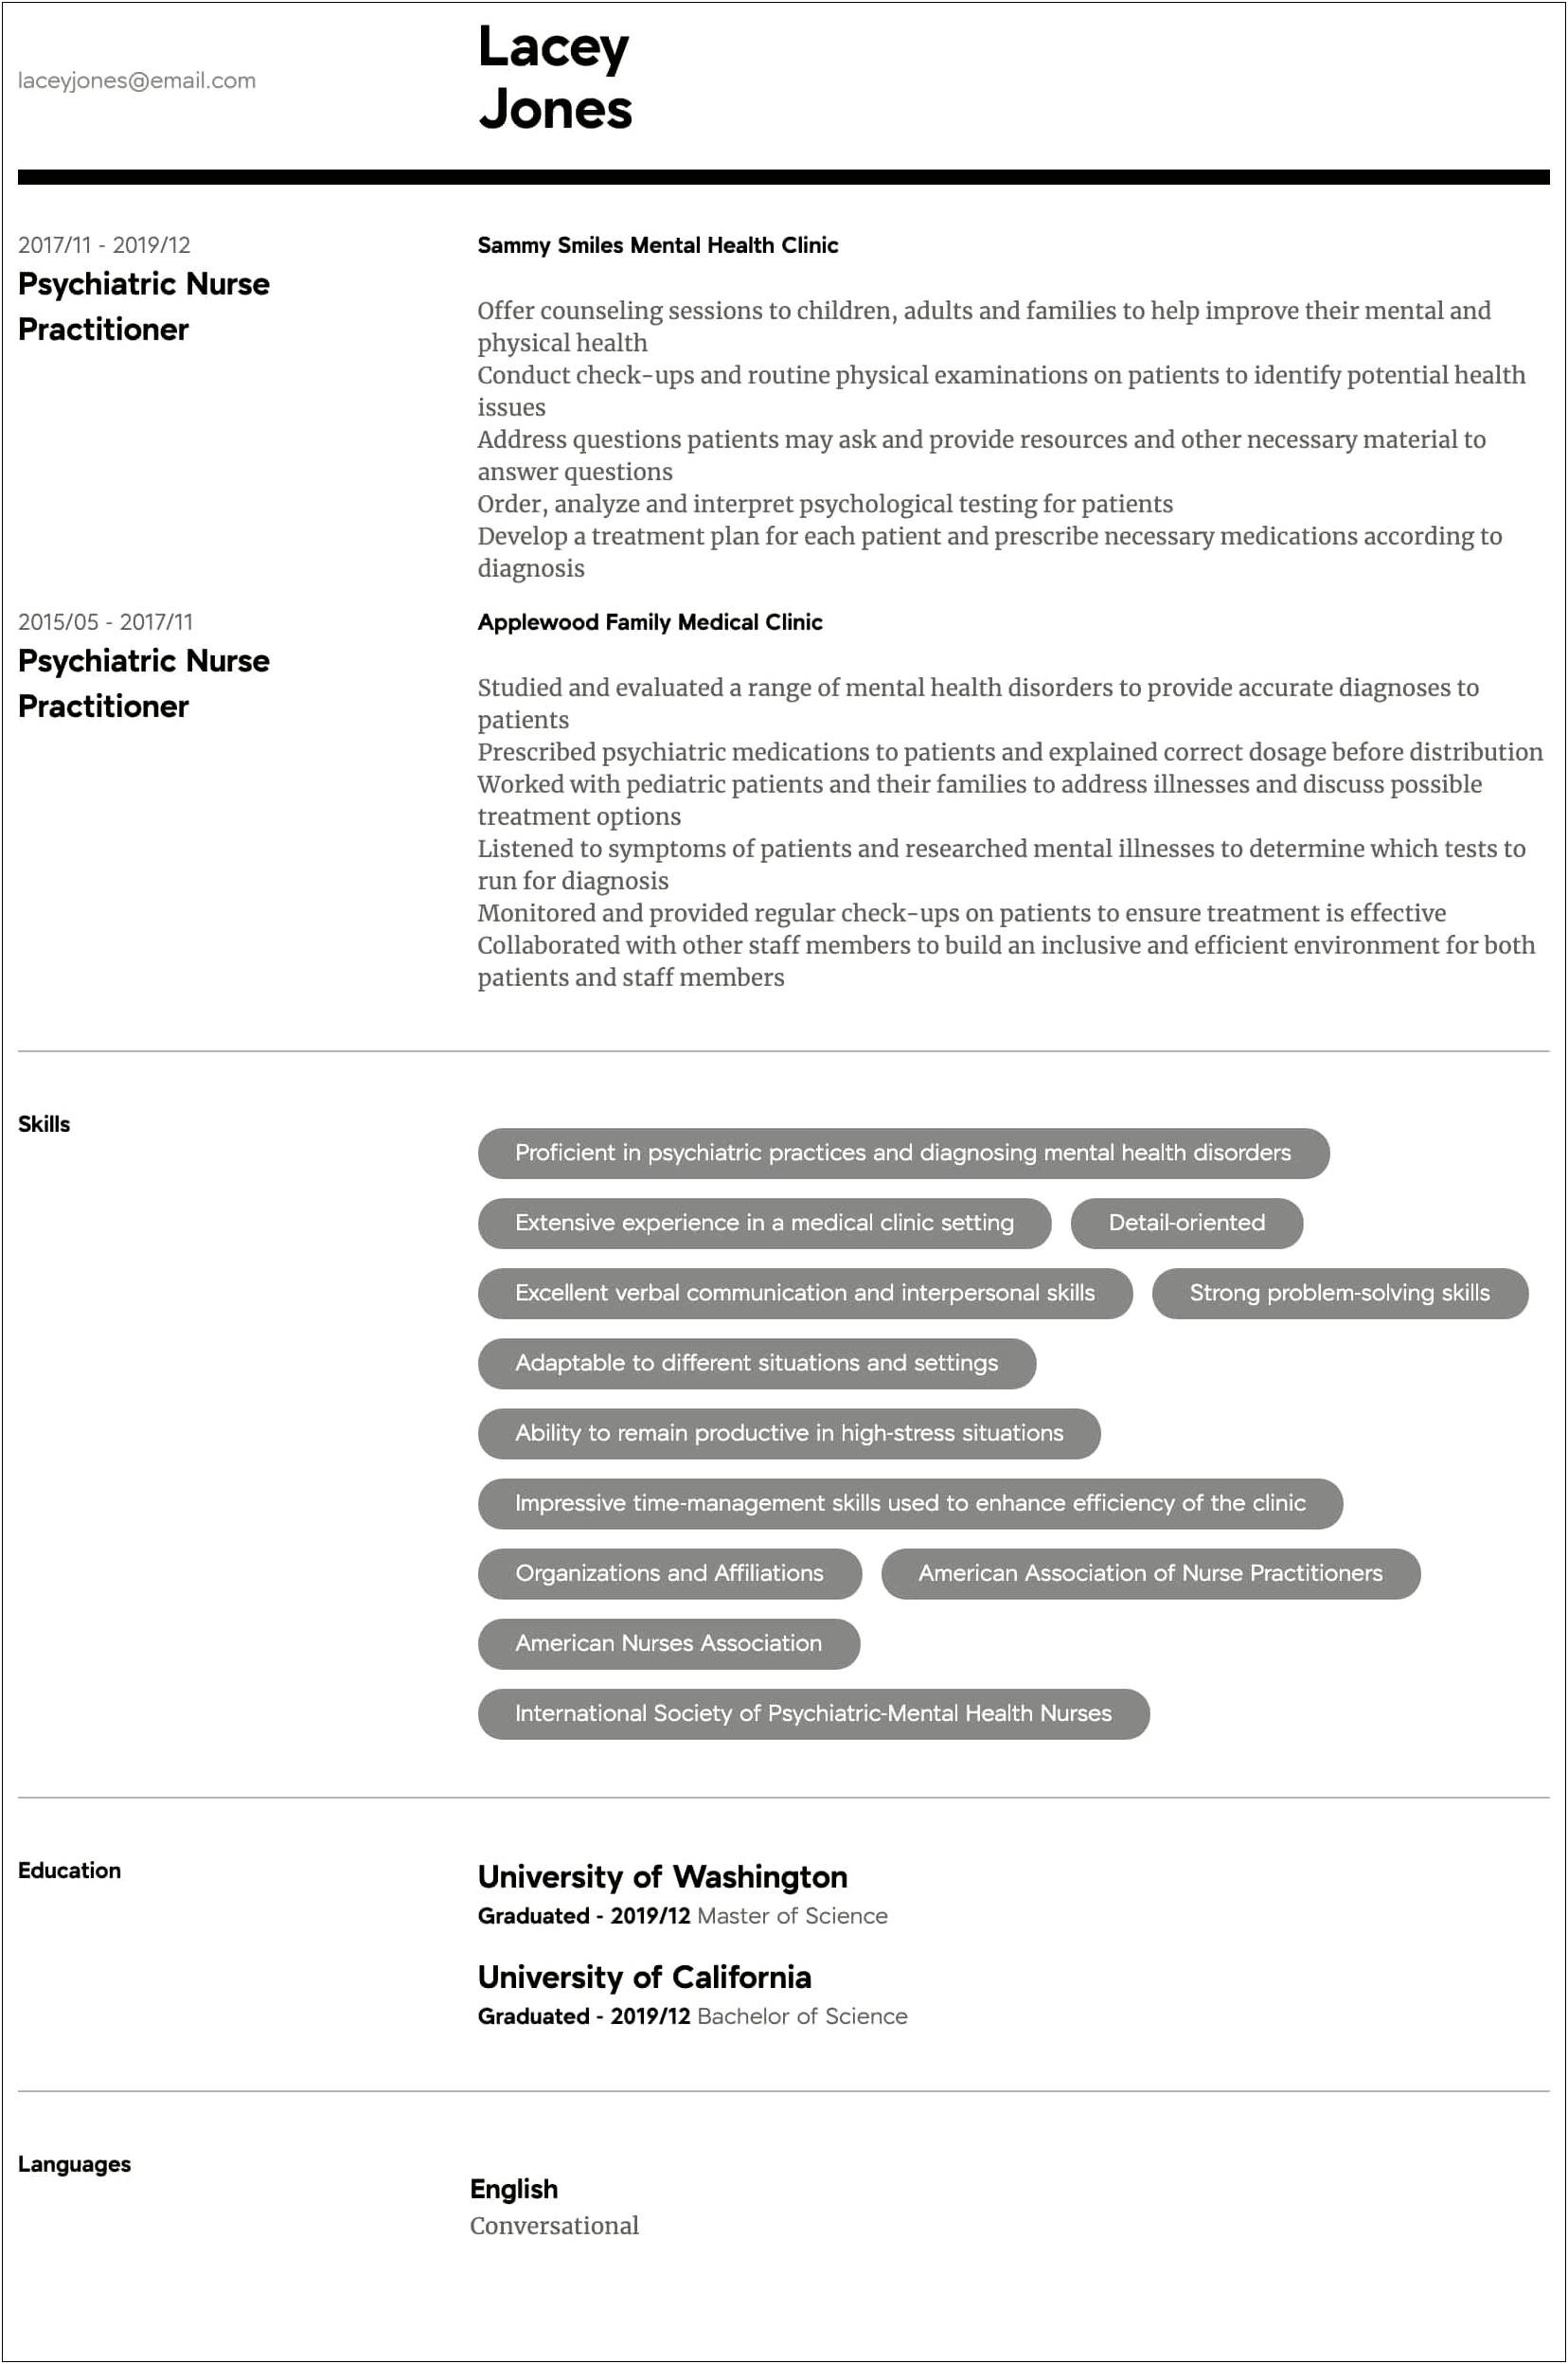 Example Resume For Nurse Practitioner